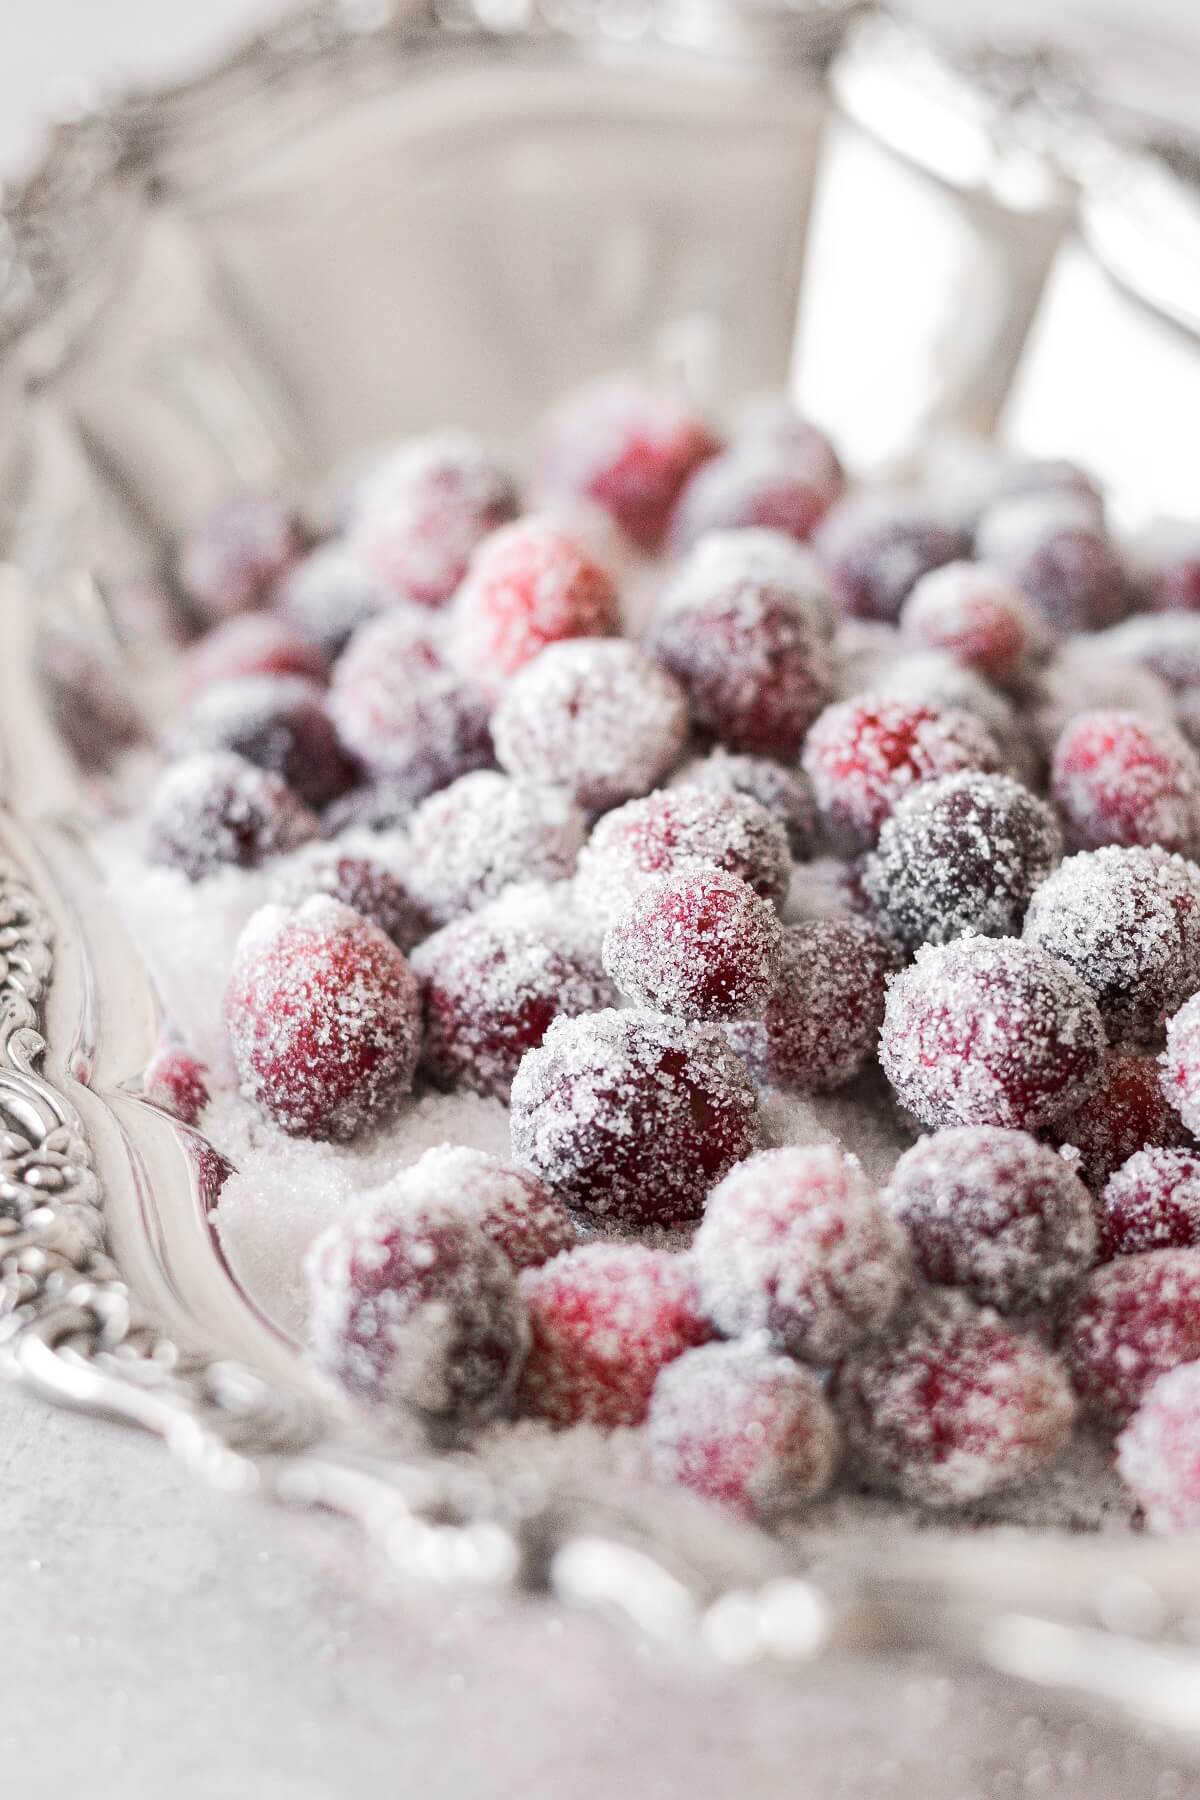 Sugared cranberries in a silver dish.